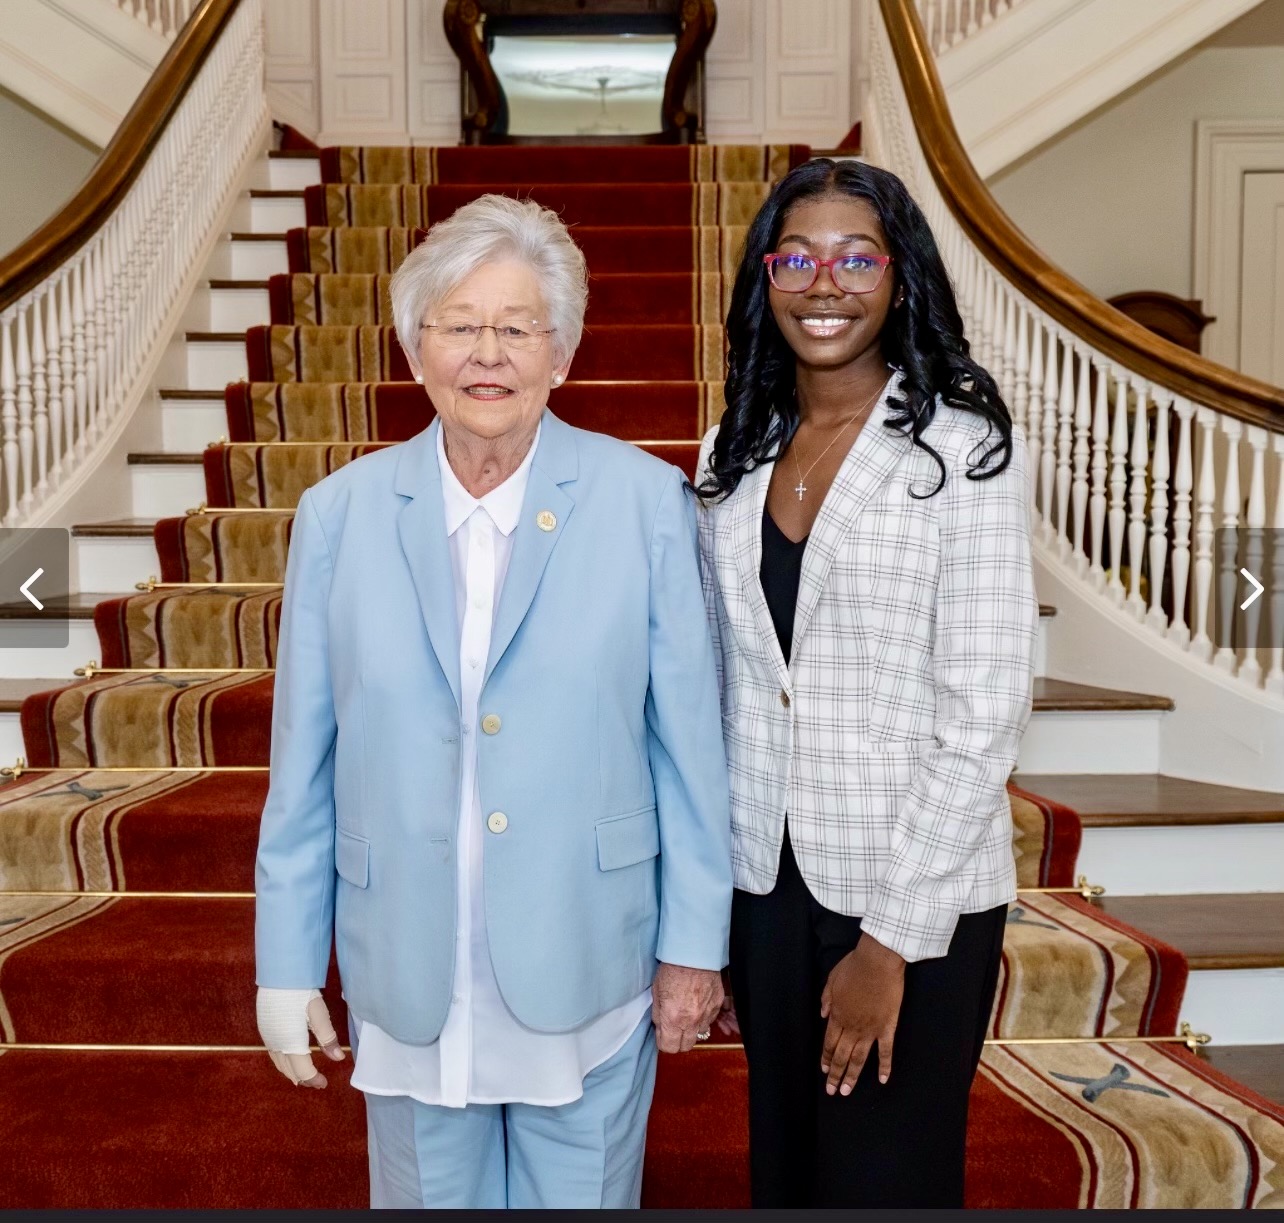 Kasia Nicholson stands proudly next to Governor Kay Ivey in front of a red velvet staircase